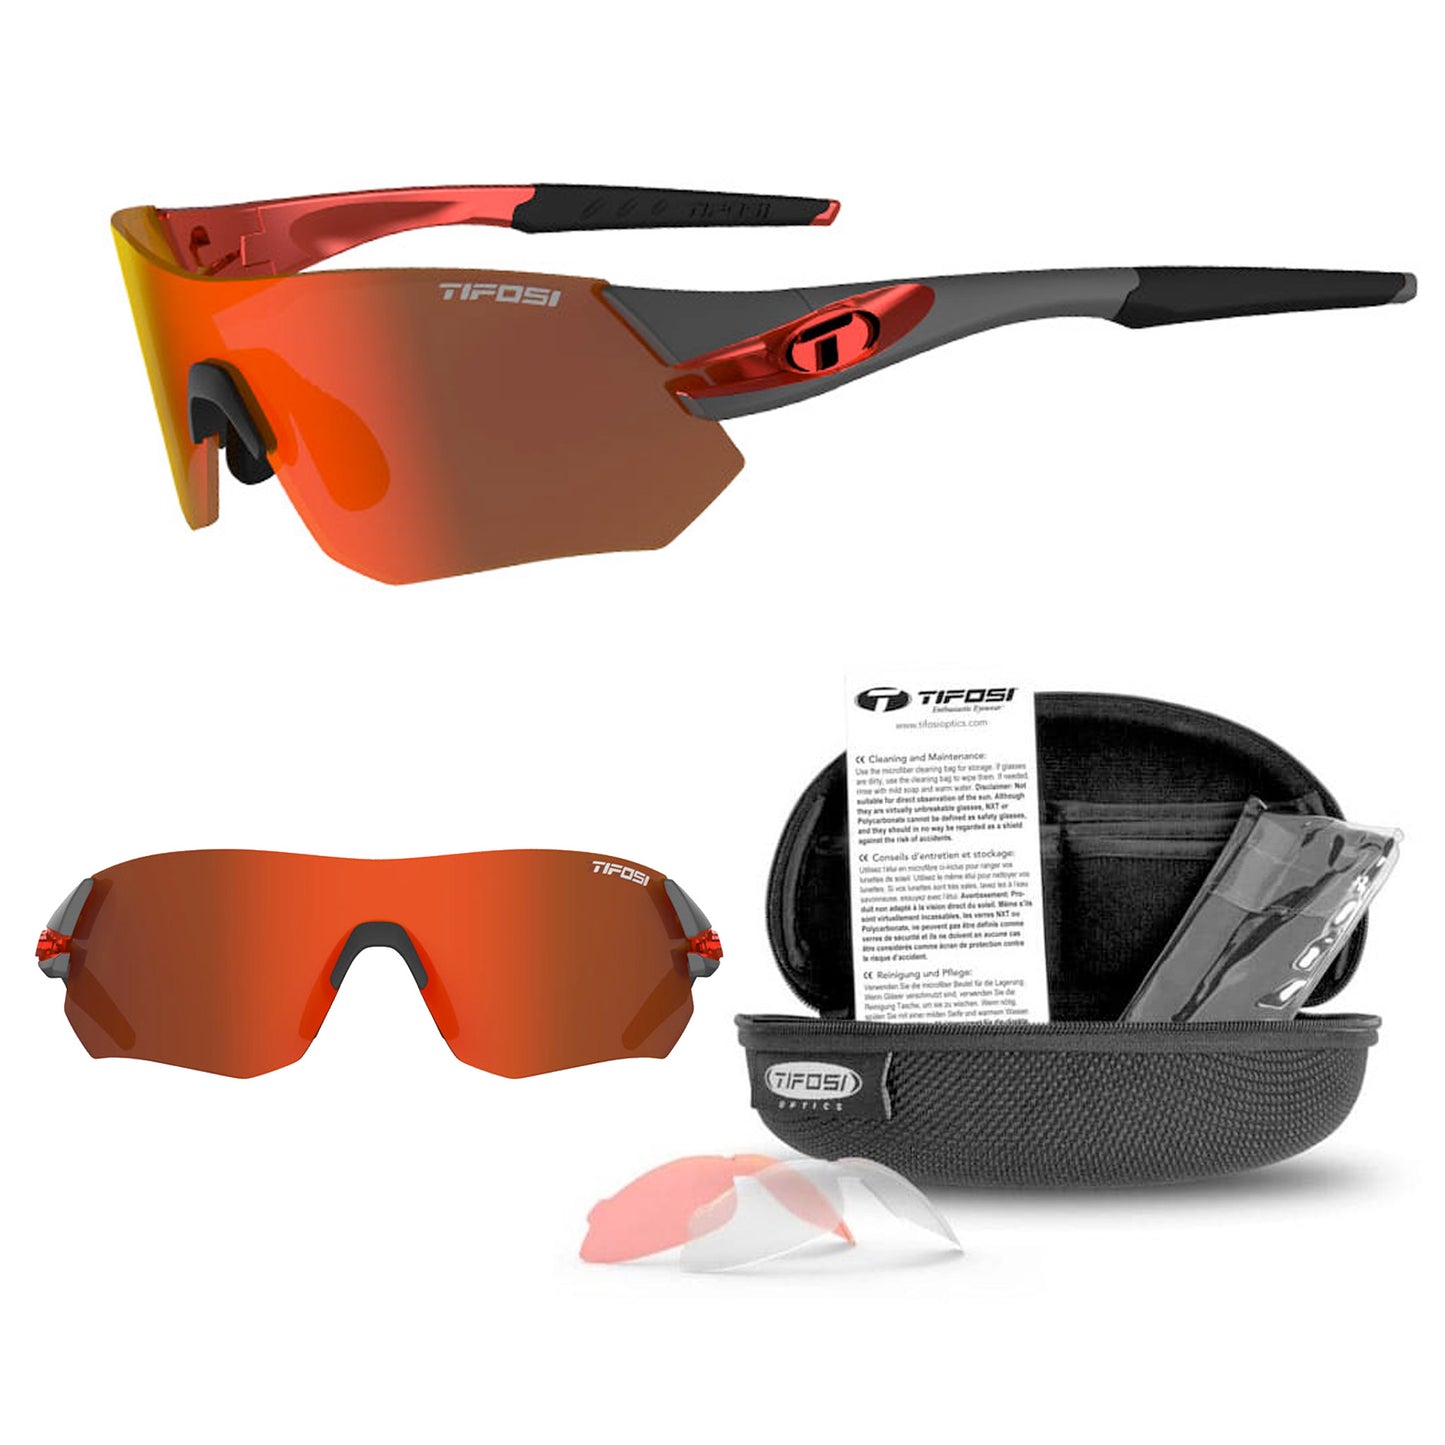 Tifosi Tsali Cycling Sunglasses With Three Interchangeable Lenses - Gunmetal/Red buy now at Woolys Wheels Sydney with free delivery